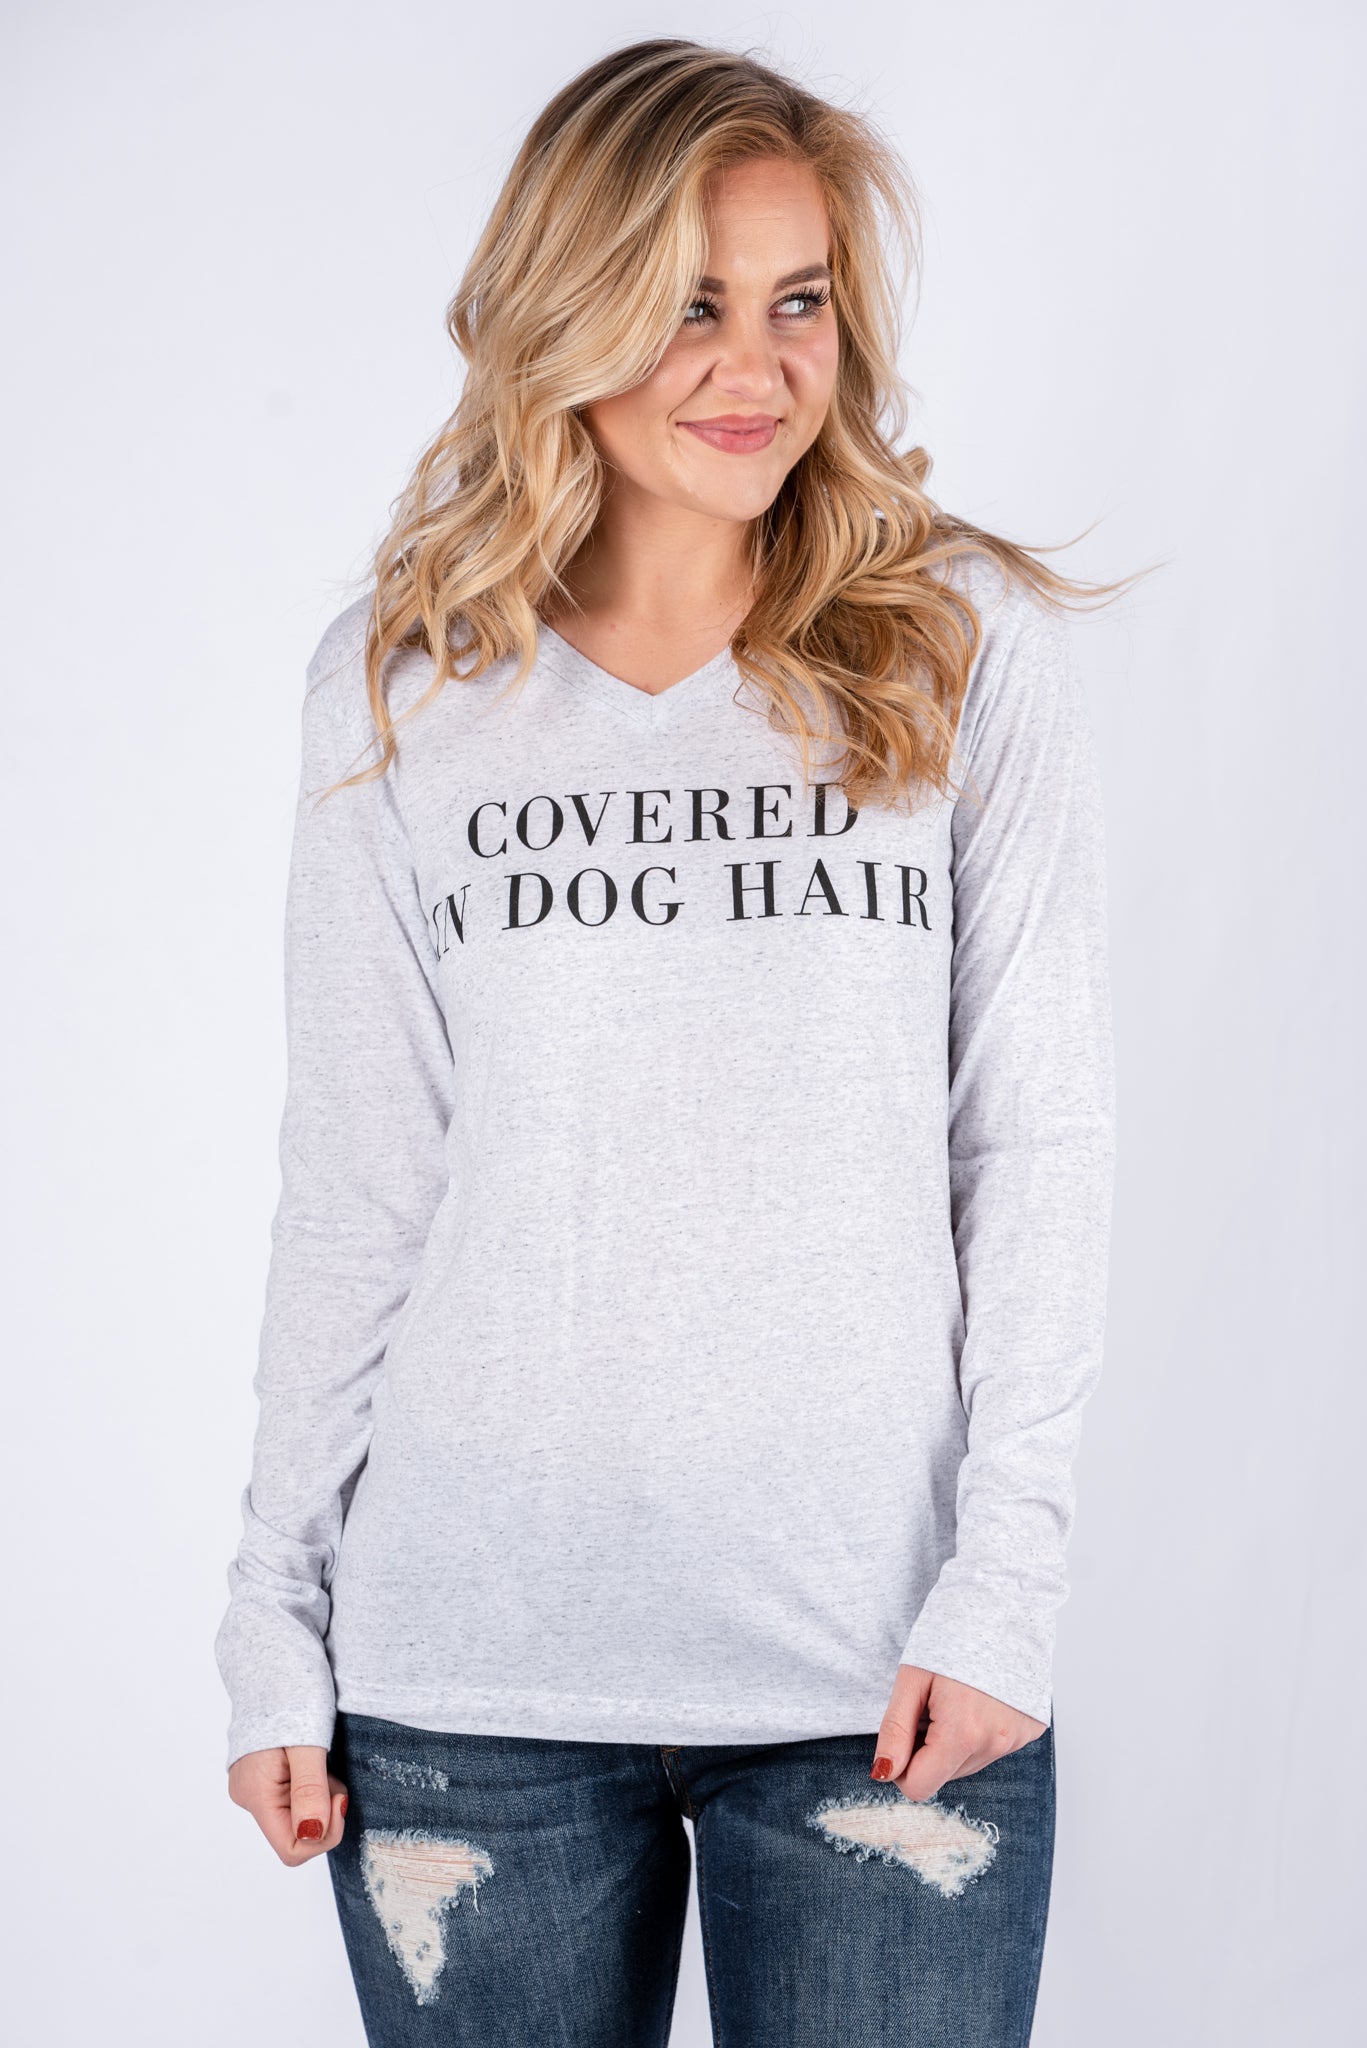 Covered in dog hair unisex long sleeve t-shirt white fleck - Adorable T-shirts - Unique Tank Tops and Graphic Tees at Lush Fashion Lounge Boutique in Oklahoma